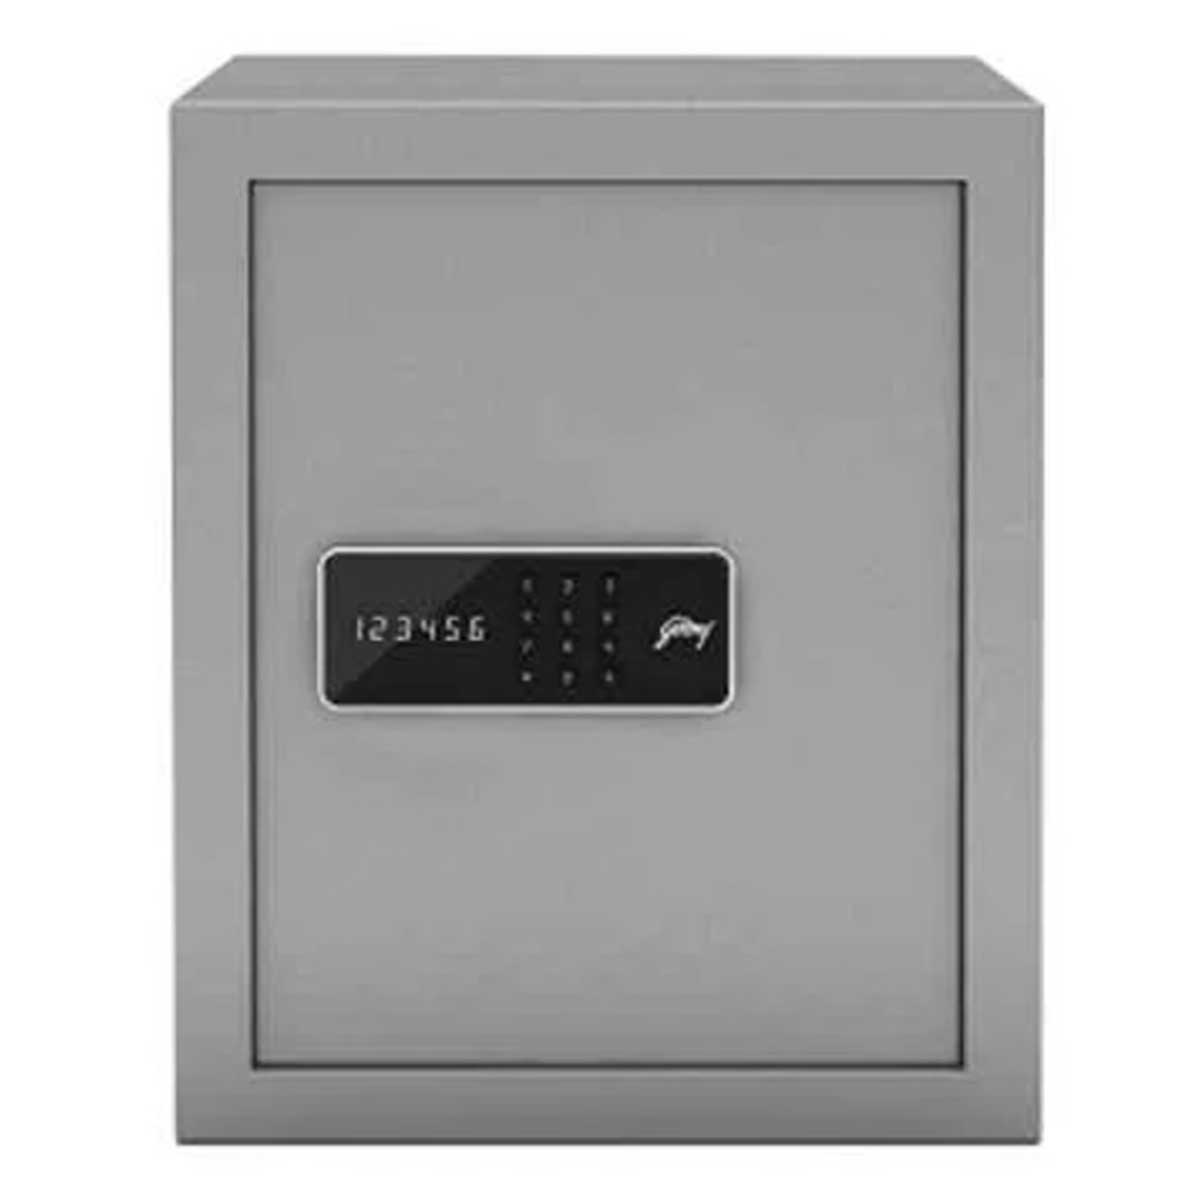 Steel security safe Manufacturers, Suppliers in East Of Kailash